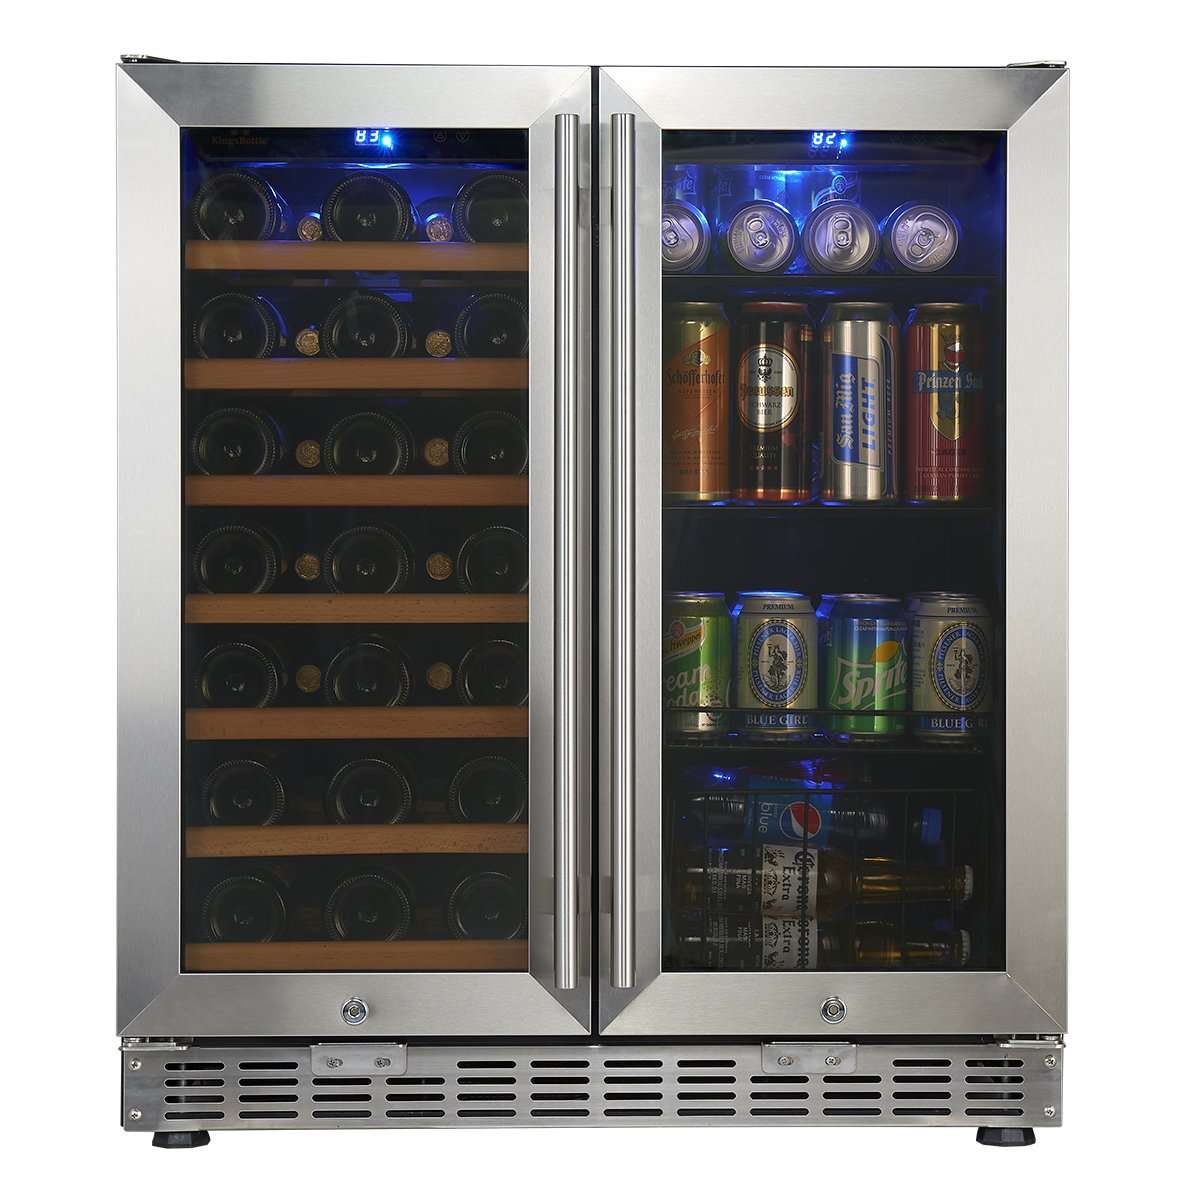 Built-in and Undercounter Coolers